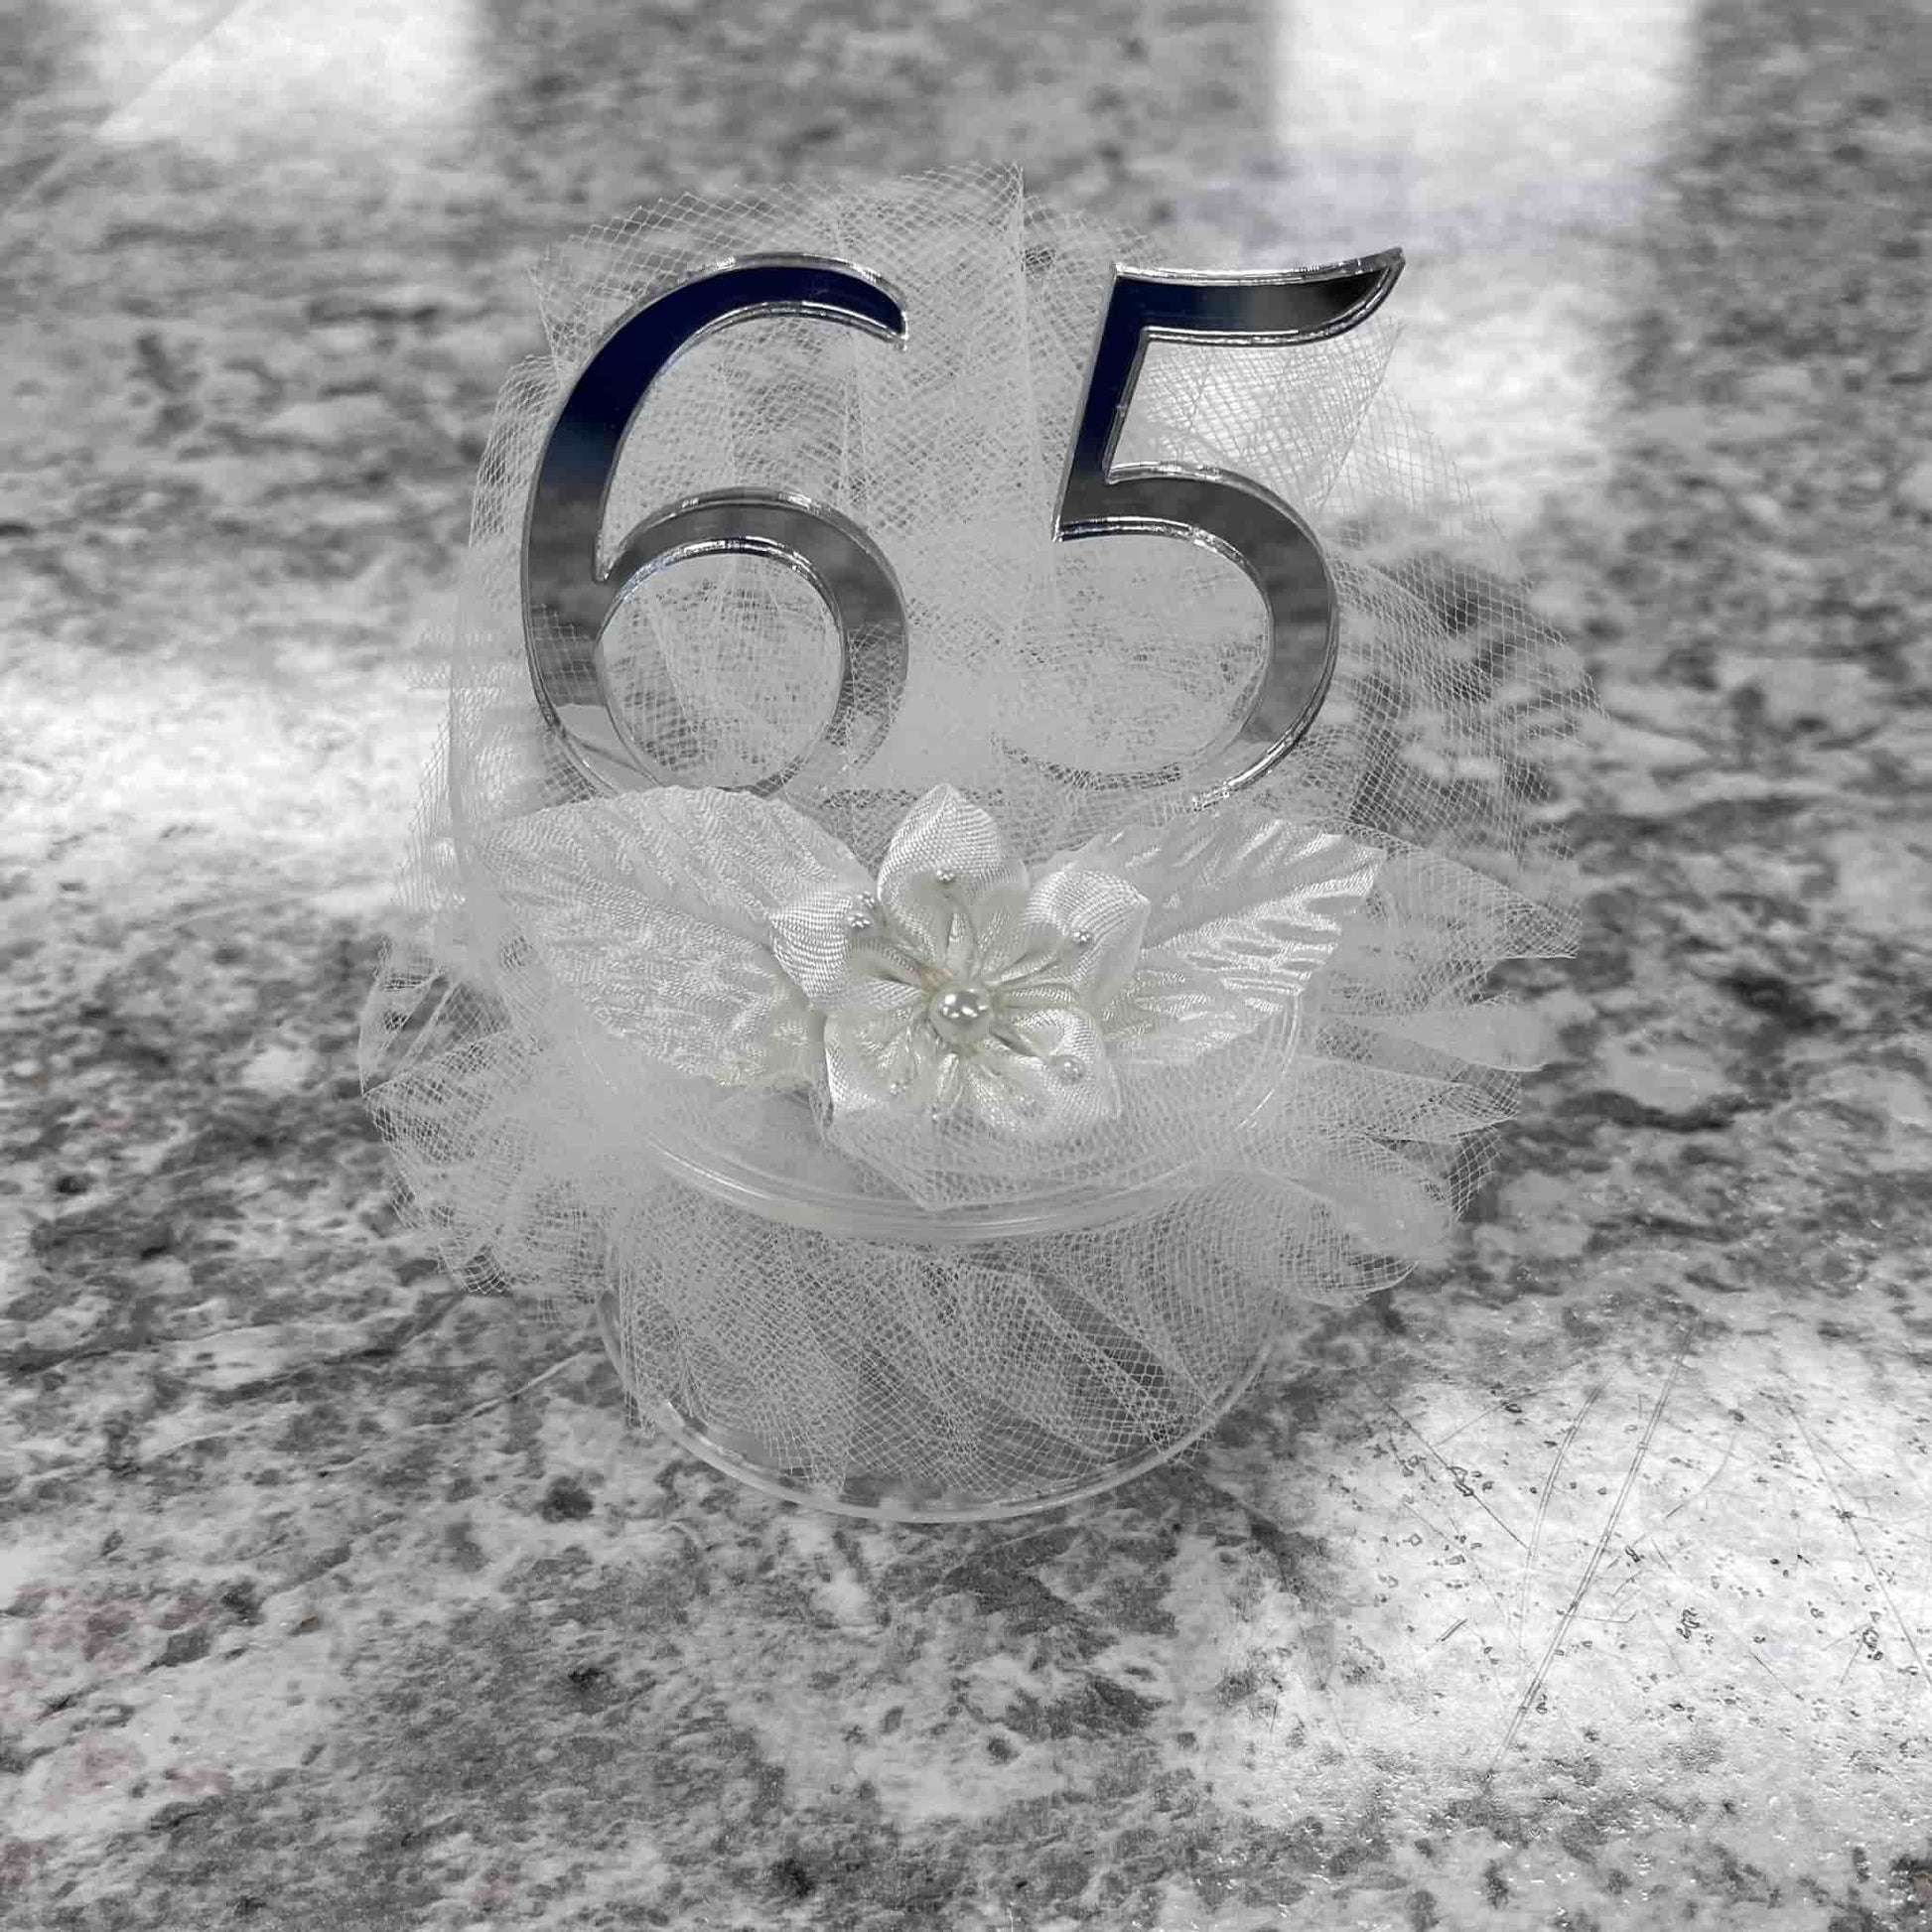 Elegant silver '65' numeral cake topper for a 65th-anniversary celebration, featuring a delicate white floral embellishment and tulle detail, presented on a clear base, perfect for a commemorative cake centerpiece.